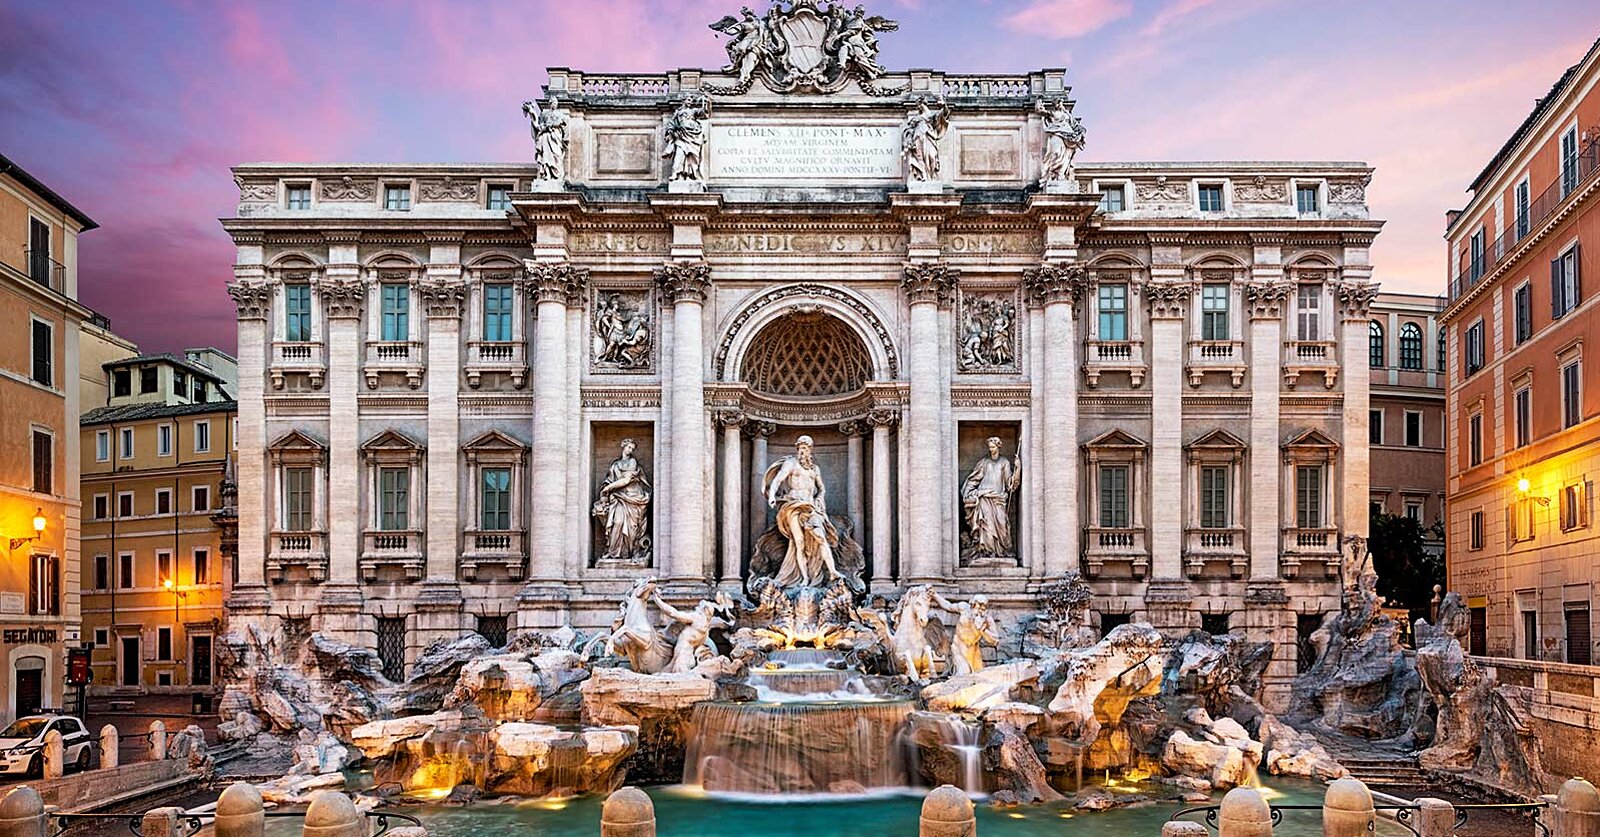 The Trevi Fountain (note the blocked window on the right of the second floor) - Rome, Italy